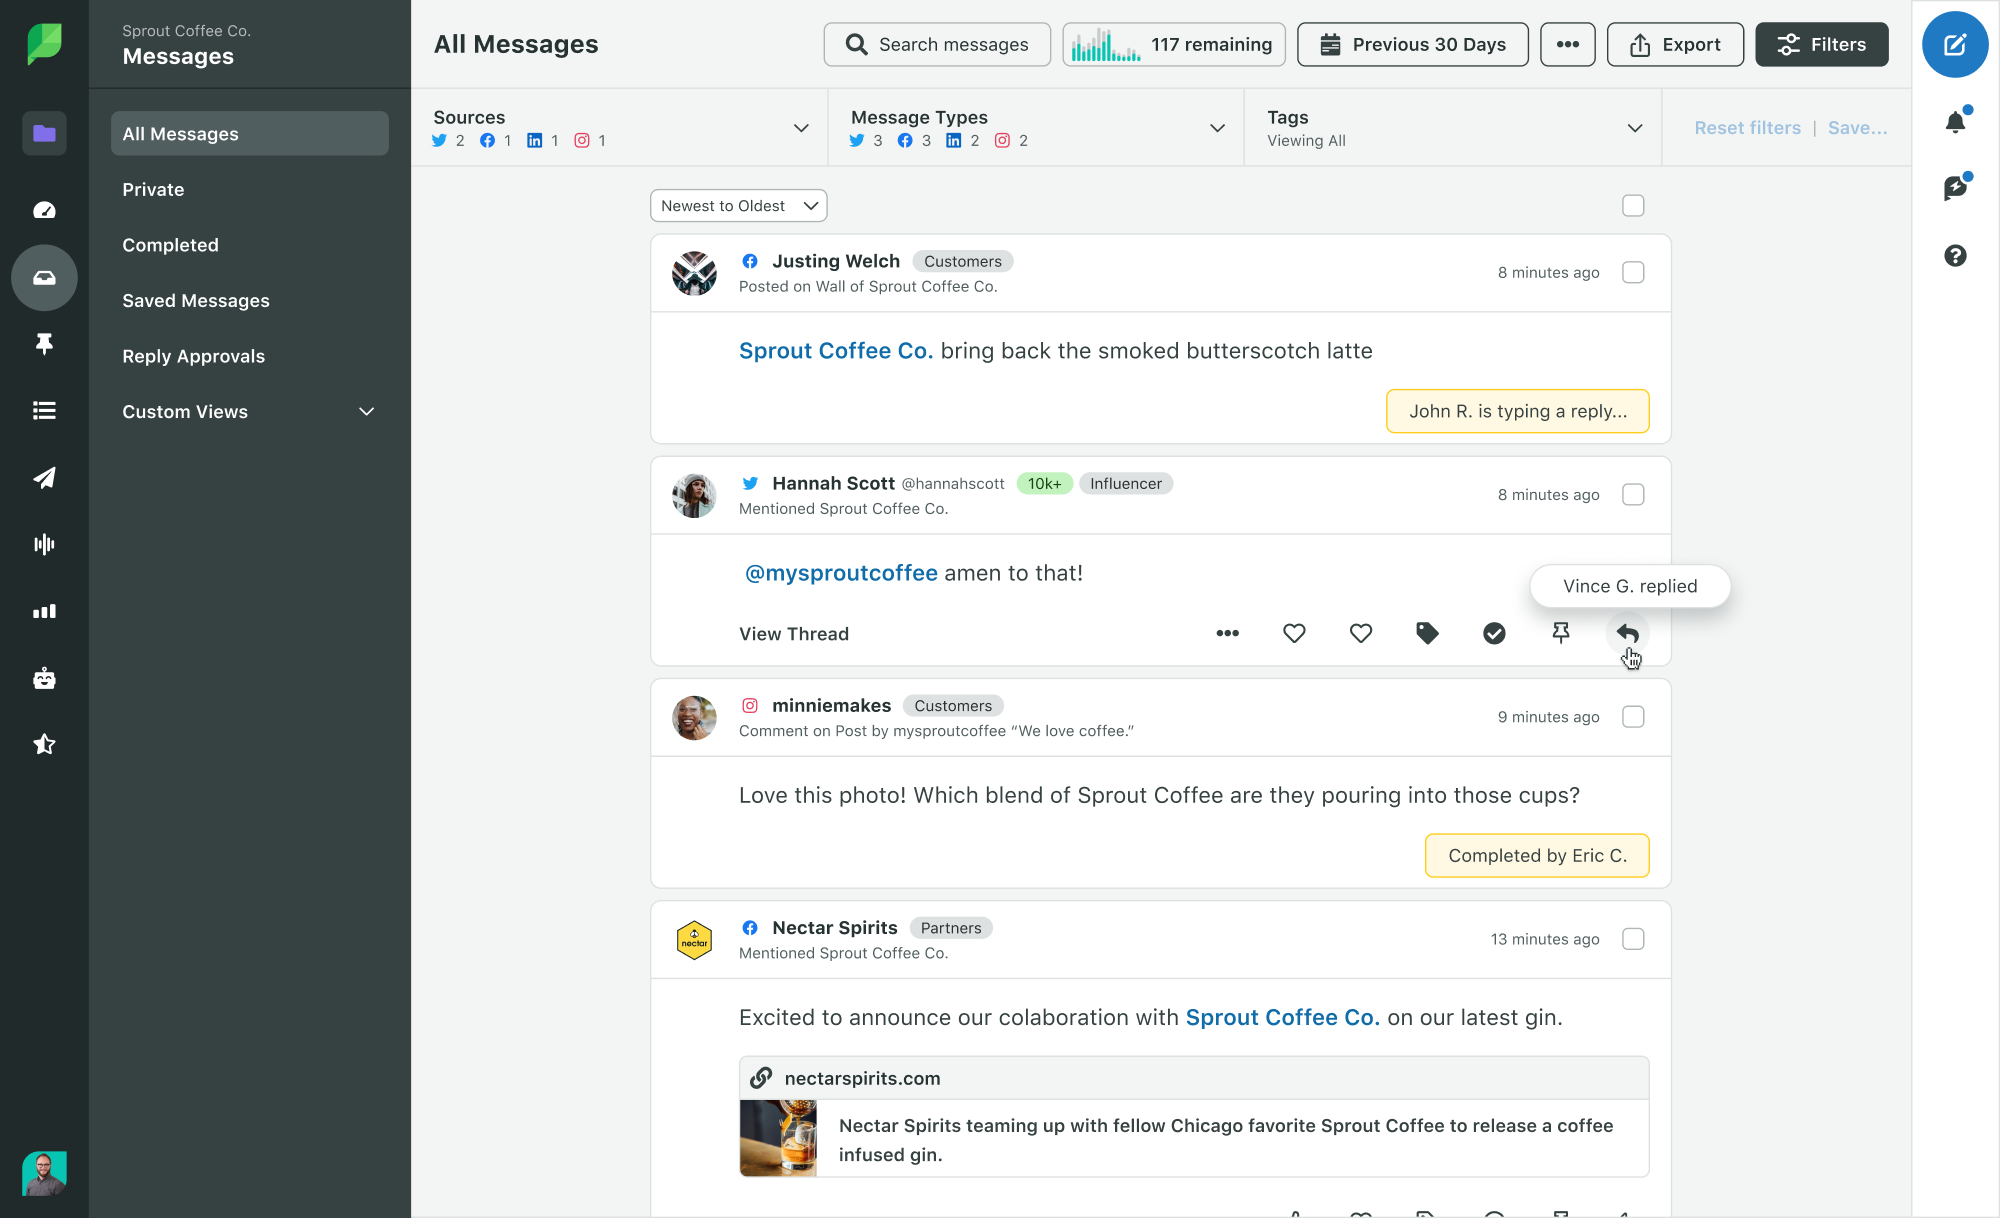 Collision detection notifications in Sprout’s Smart Inbox help you and your team avoid sending duplicate or conflicting responses to the same message.